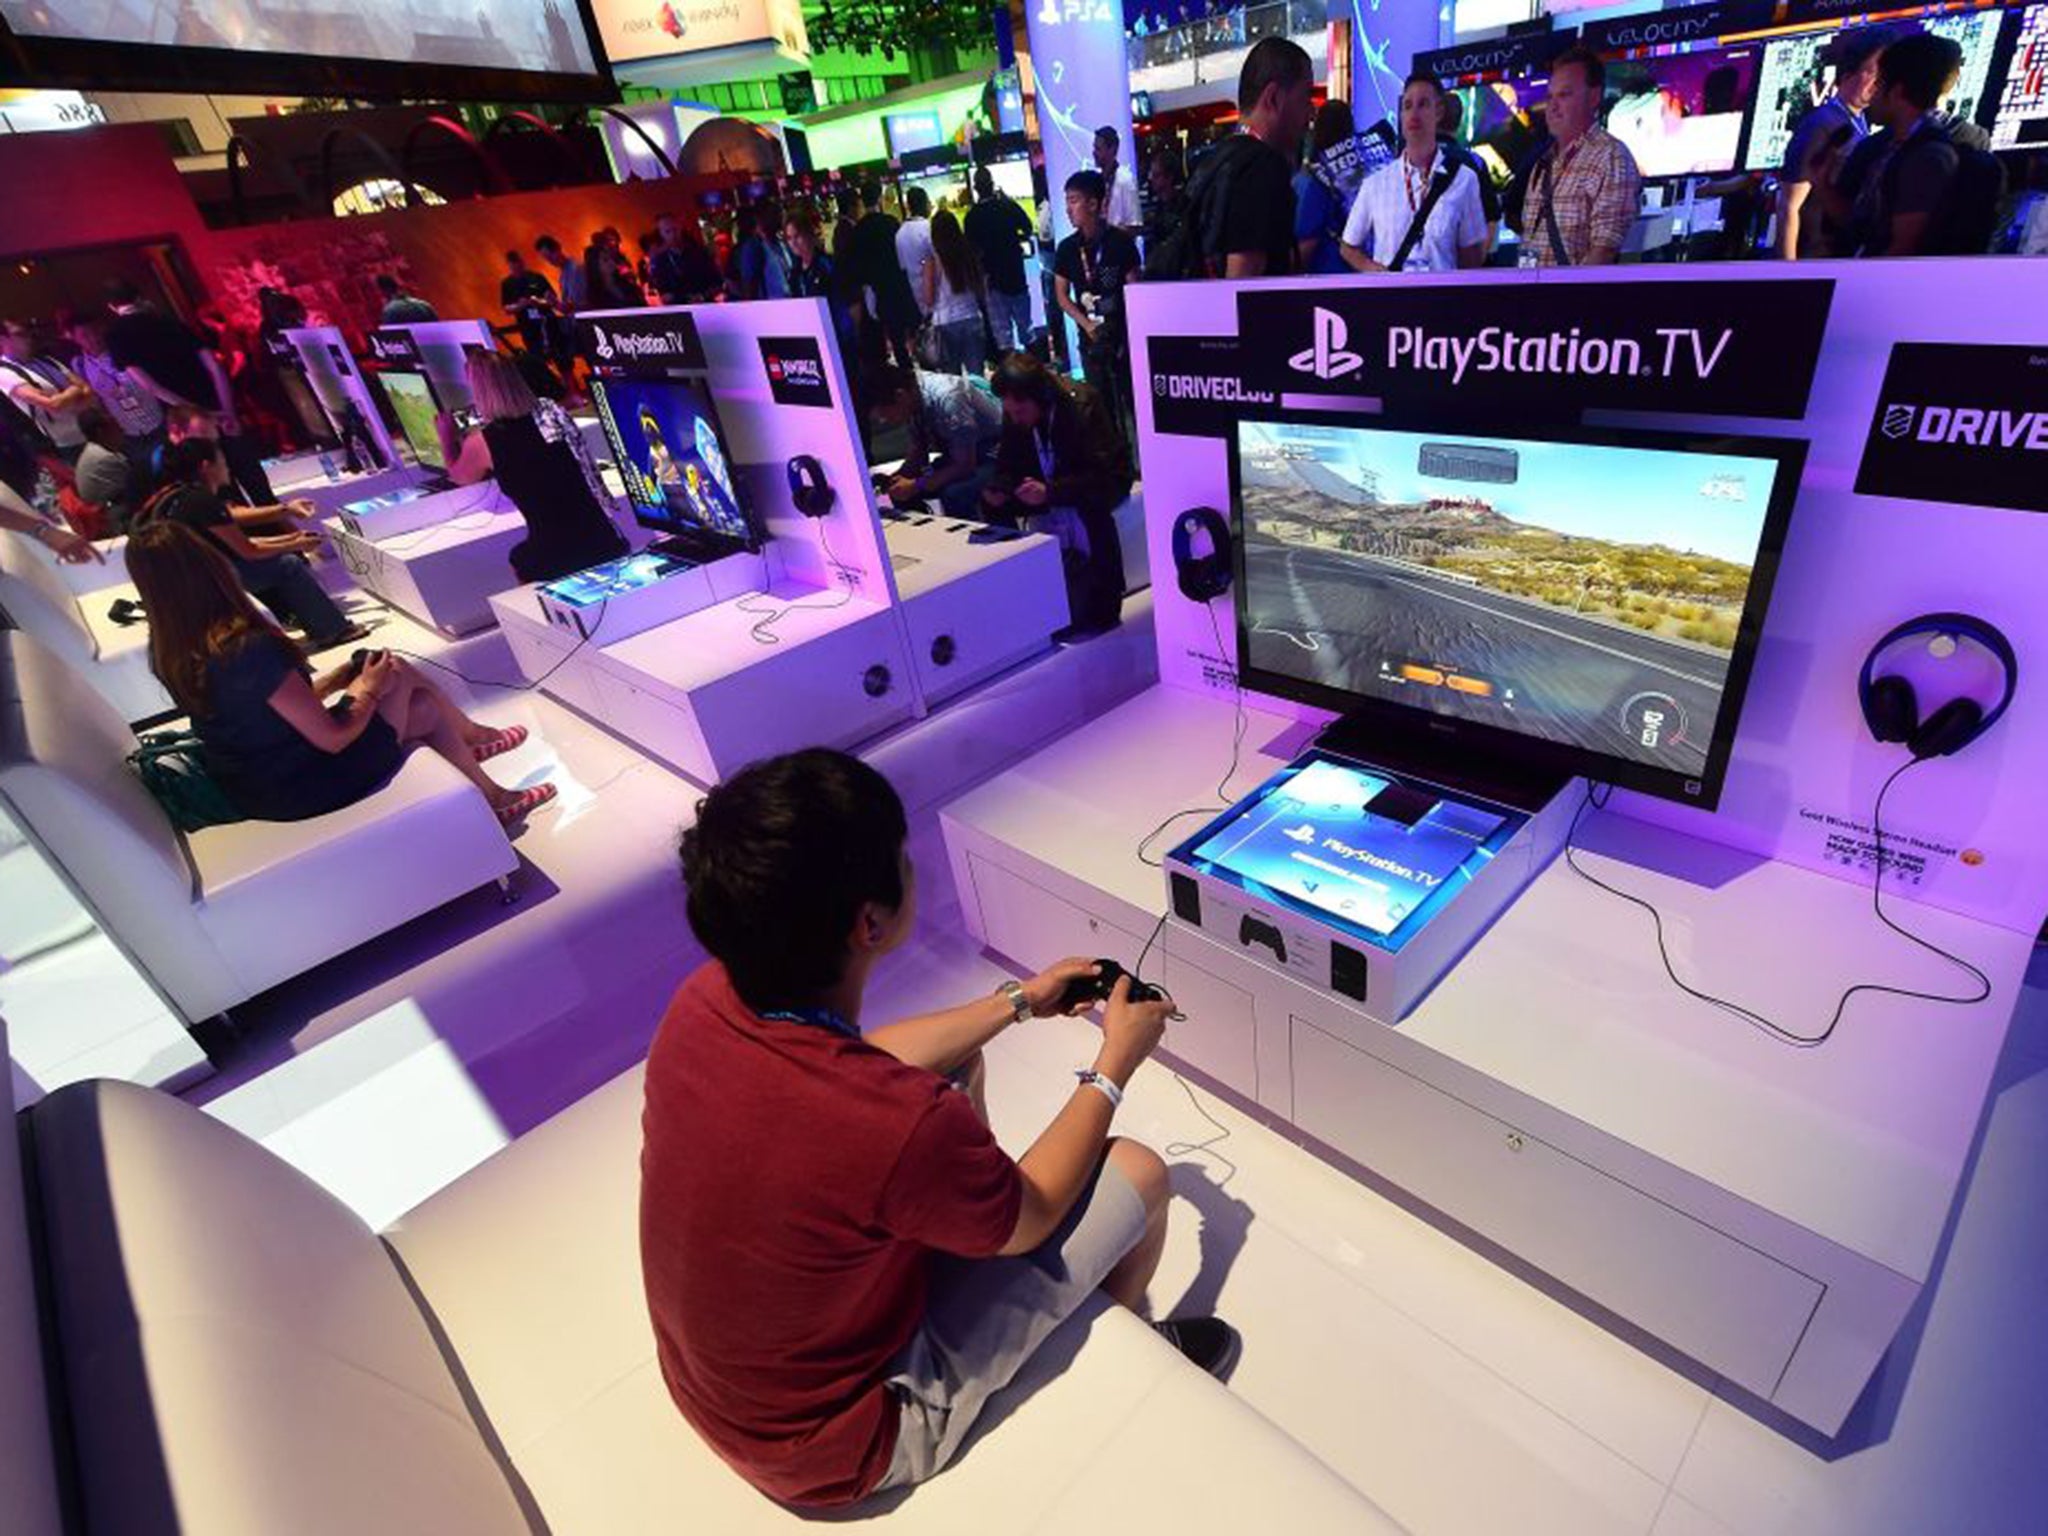 Gamers test the new PlayStation TV consoles at the E3 event in Los Angeles